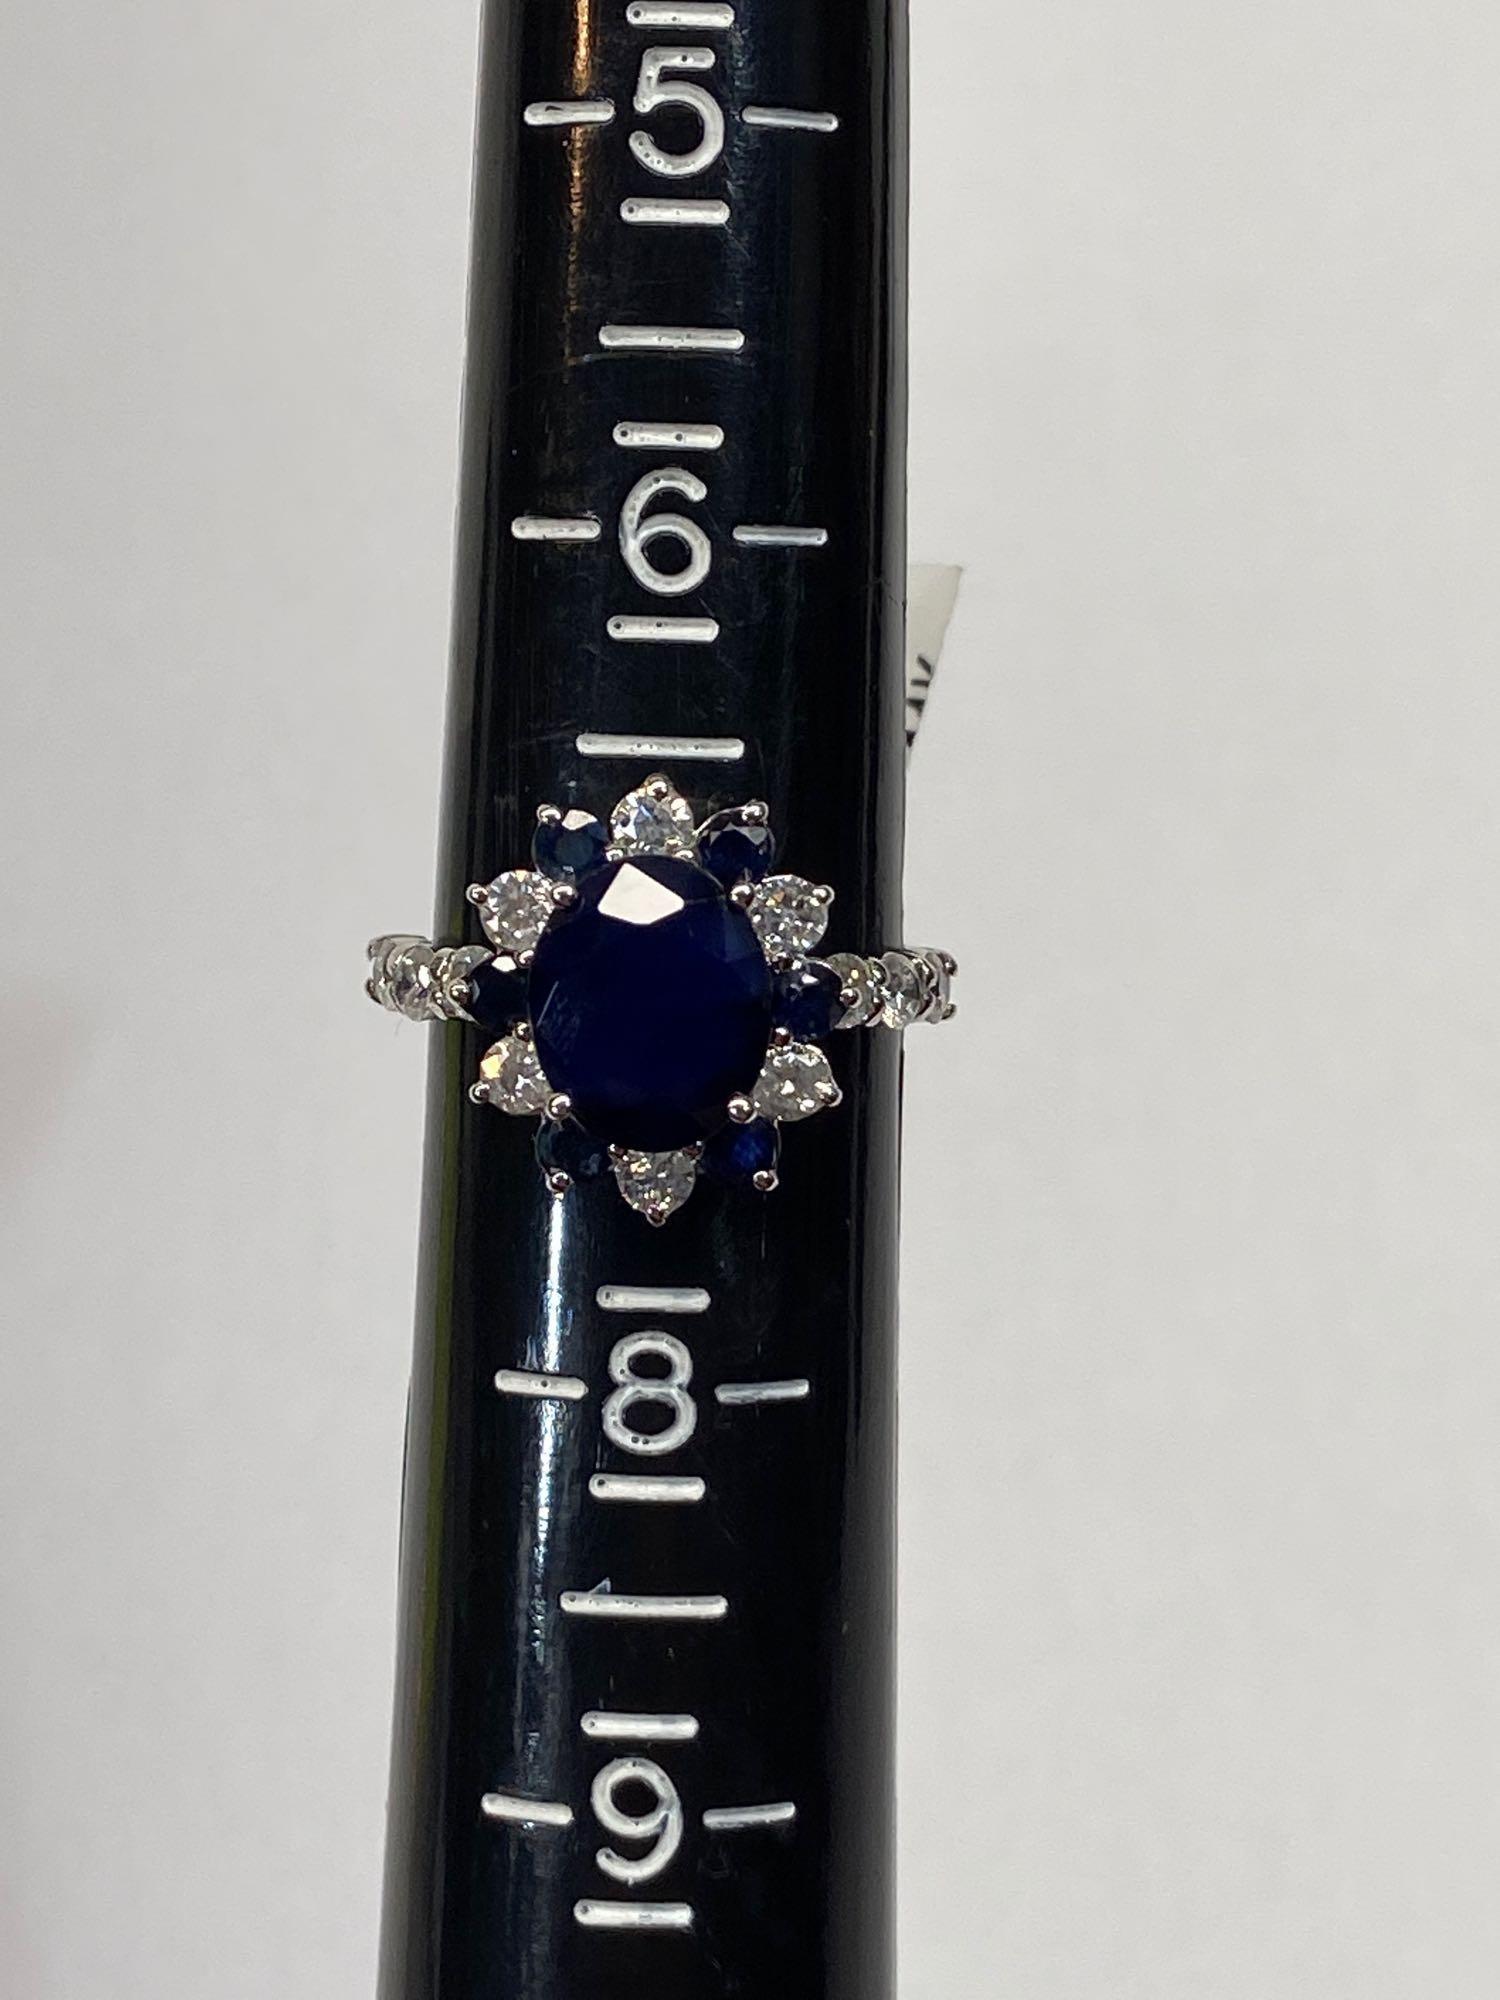 4.06ct Sapphires, 0.93cts Diamonds, 14K White Gold Ring, Size 7, Certified & Graded by AIG